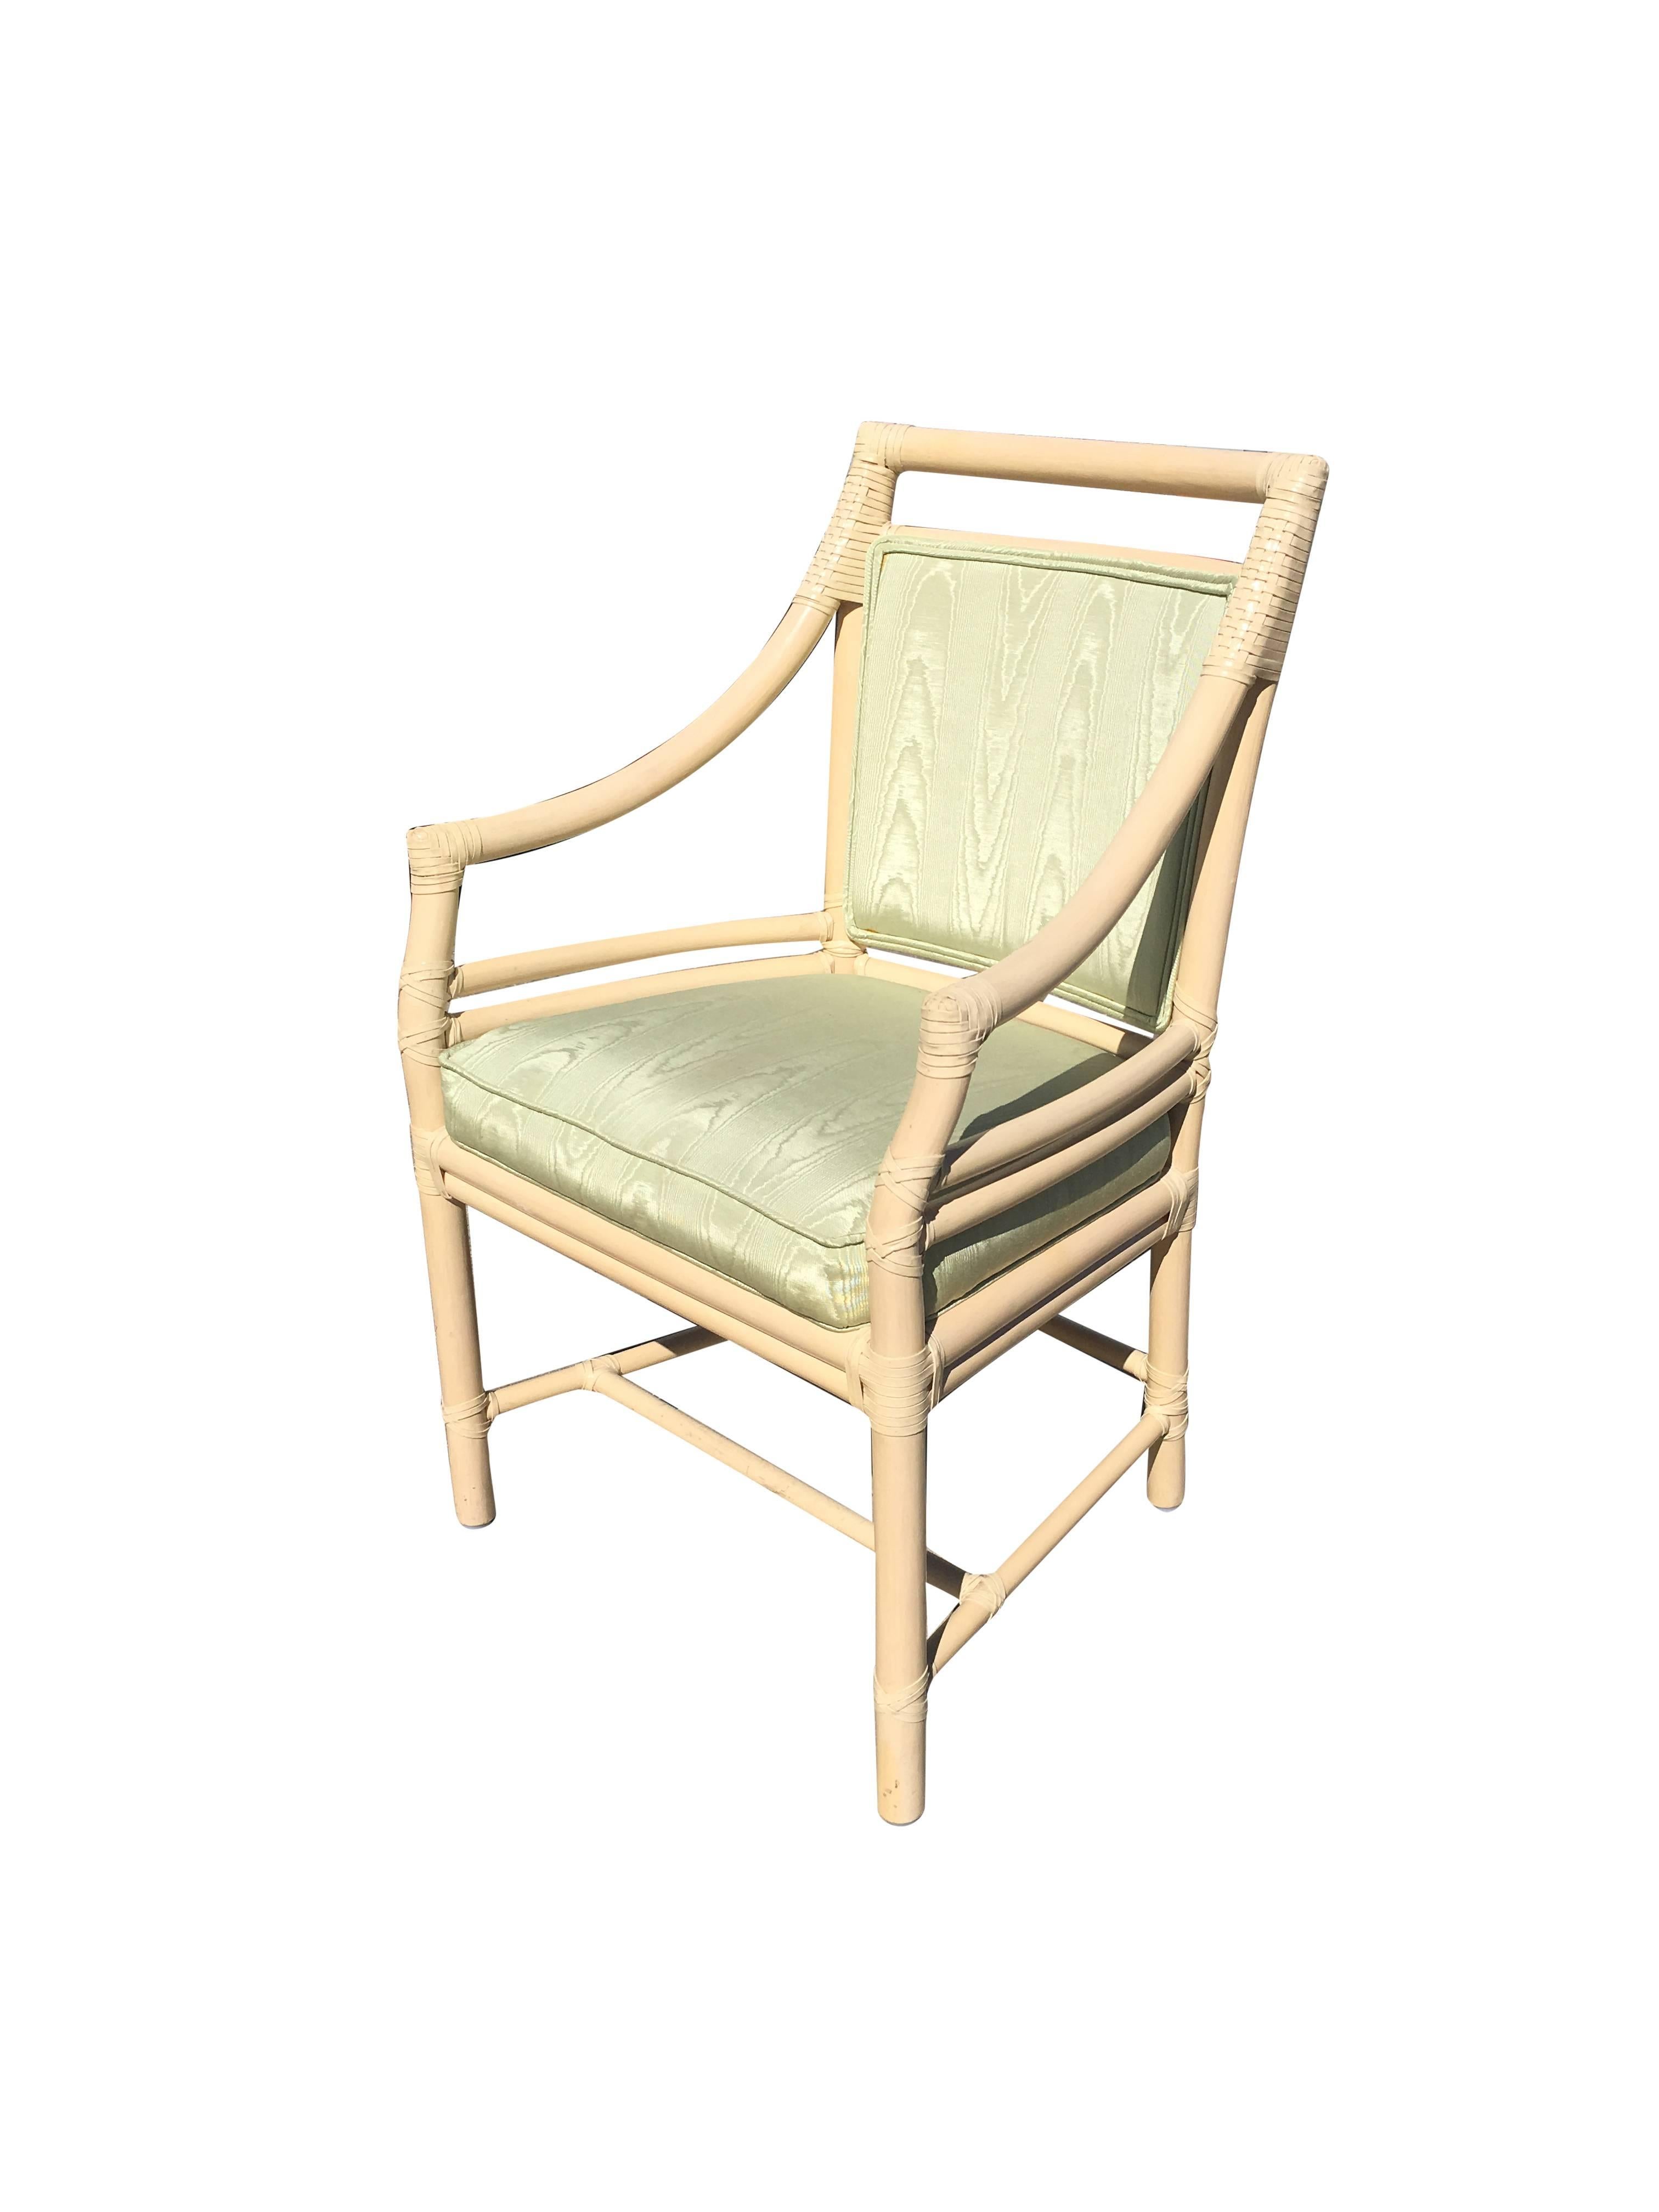 A great set of ten rattan dining chairs by McGuire. The set is as pictured. They are designed with the very popular target back style and have green sharkskin Fabric upholstered cushions.
 All chairs share the iconic McGuire leather strap wrappings.